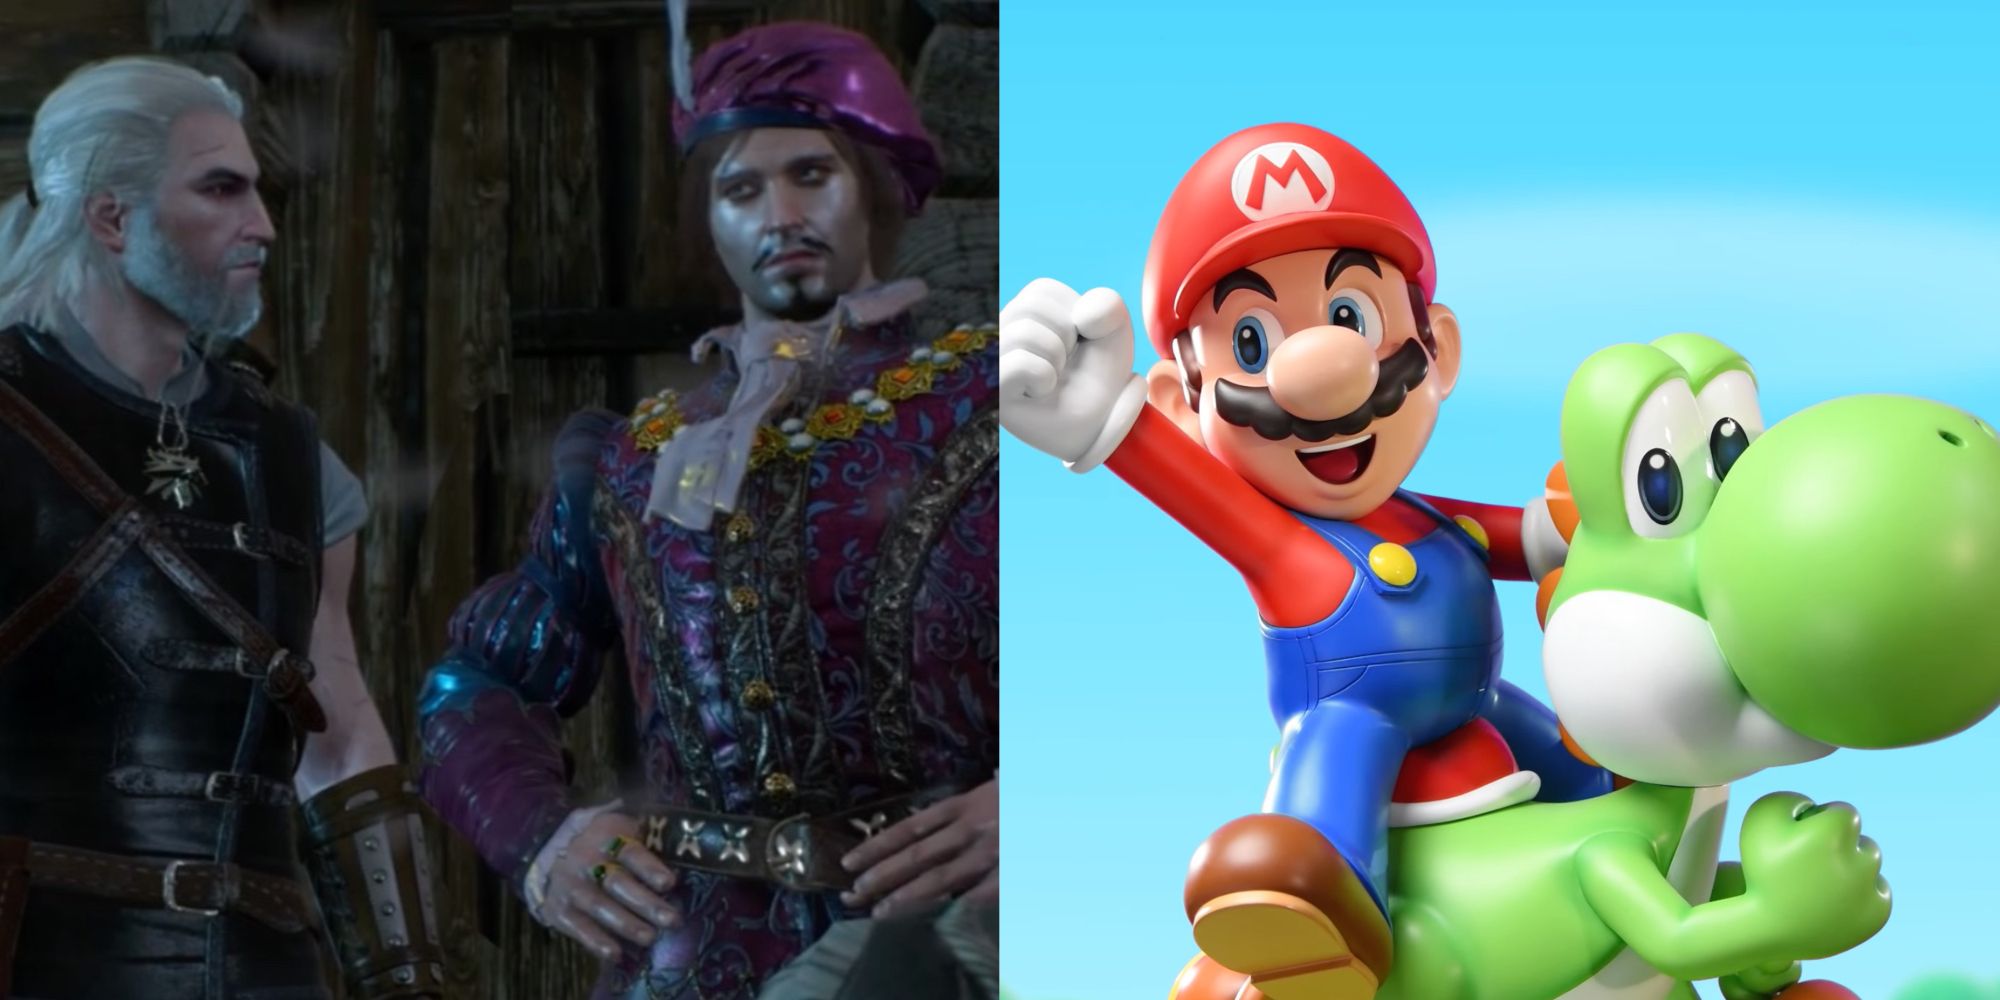 Geralt and Dandelion on the left and Mario with Yoshi on the right